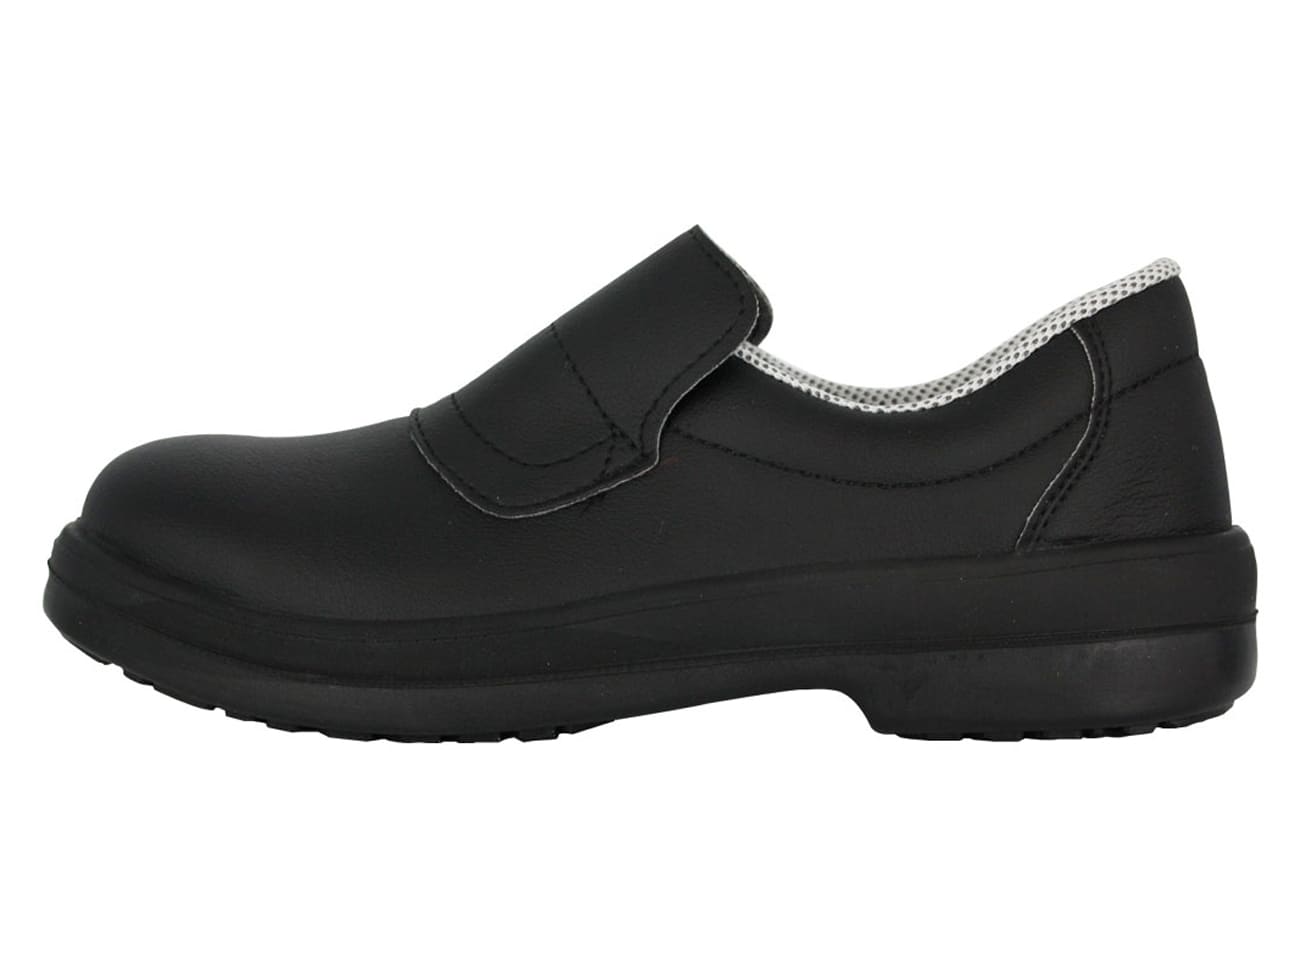 Tony Black Catering Safety Shoes - Size 38 - NORD'WAYS - Meilleur du Chef